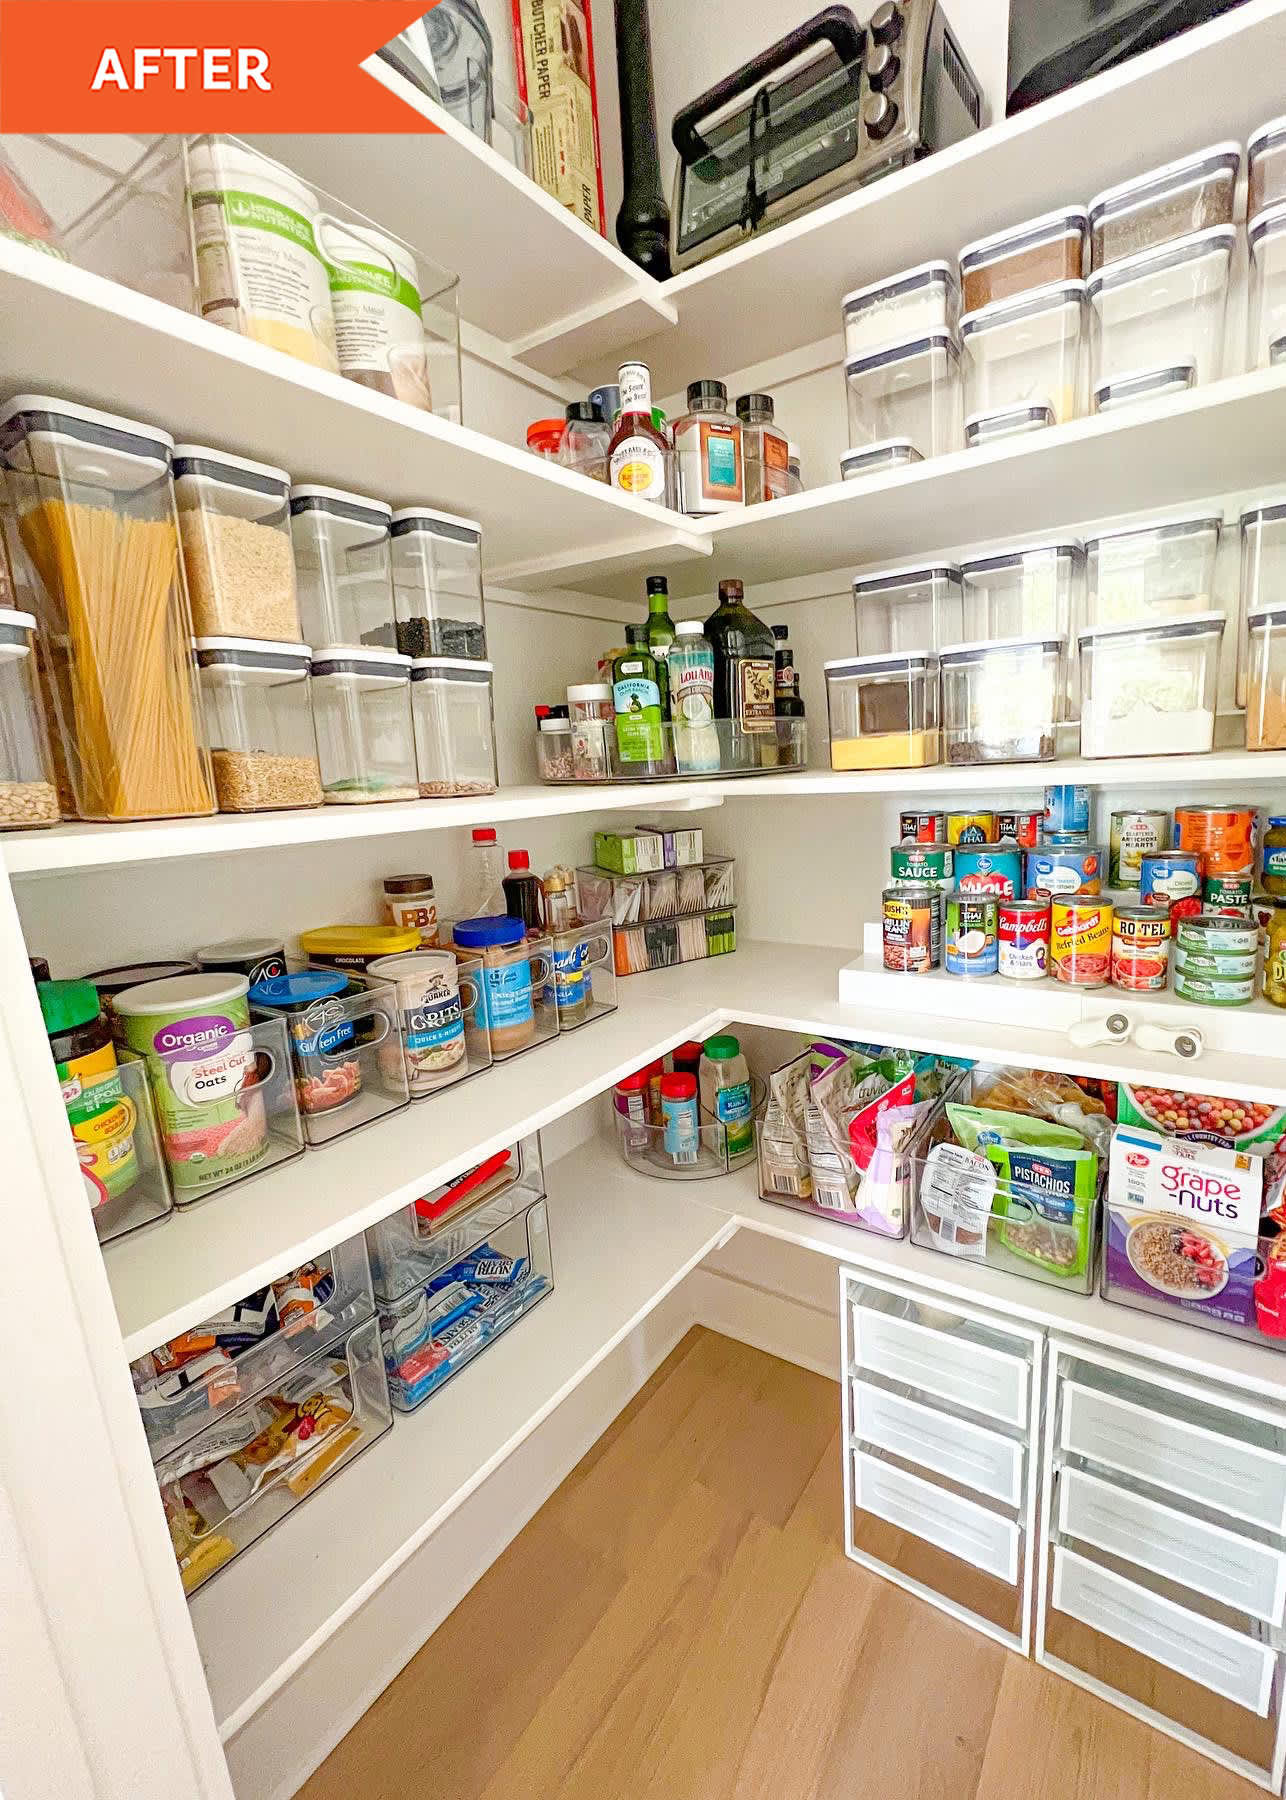 https://cdn.apartmenttherapy.info/image/upload/v1664321595/at/organize-clean/before-after/Tandi%20Lenamond%20Pantry/TandiLenamond3_updated.jpg